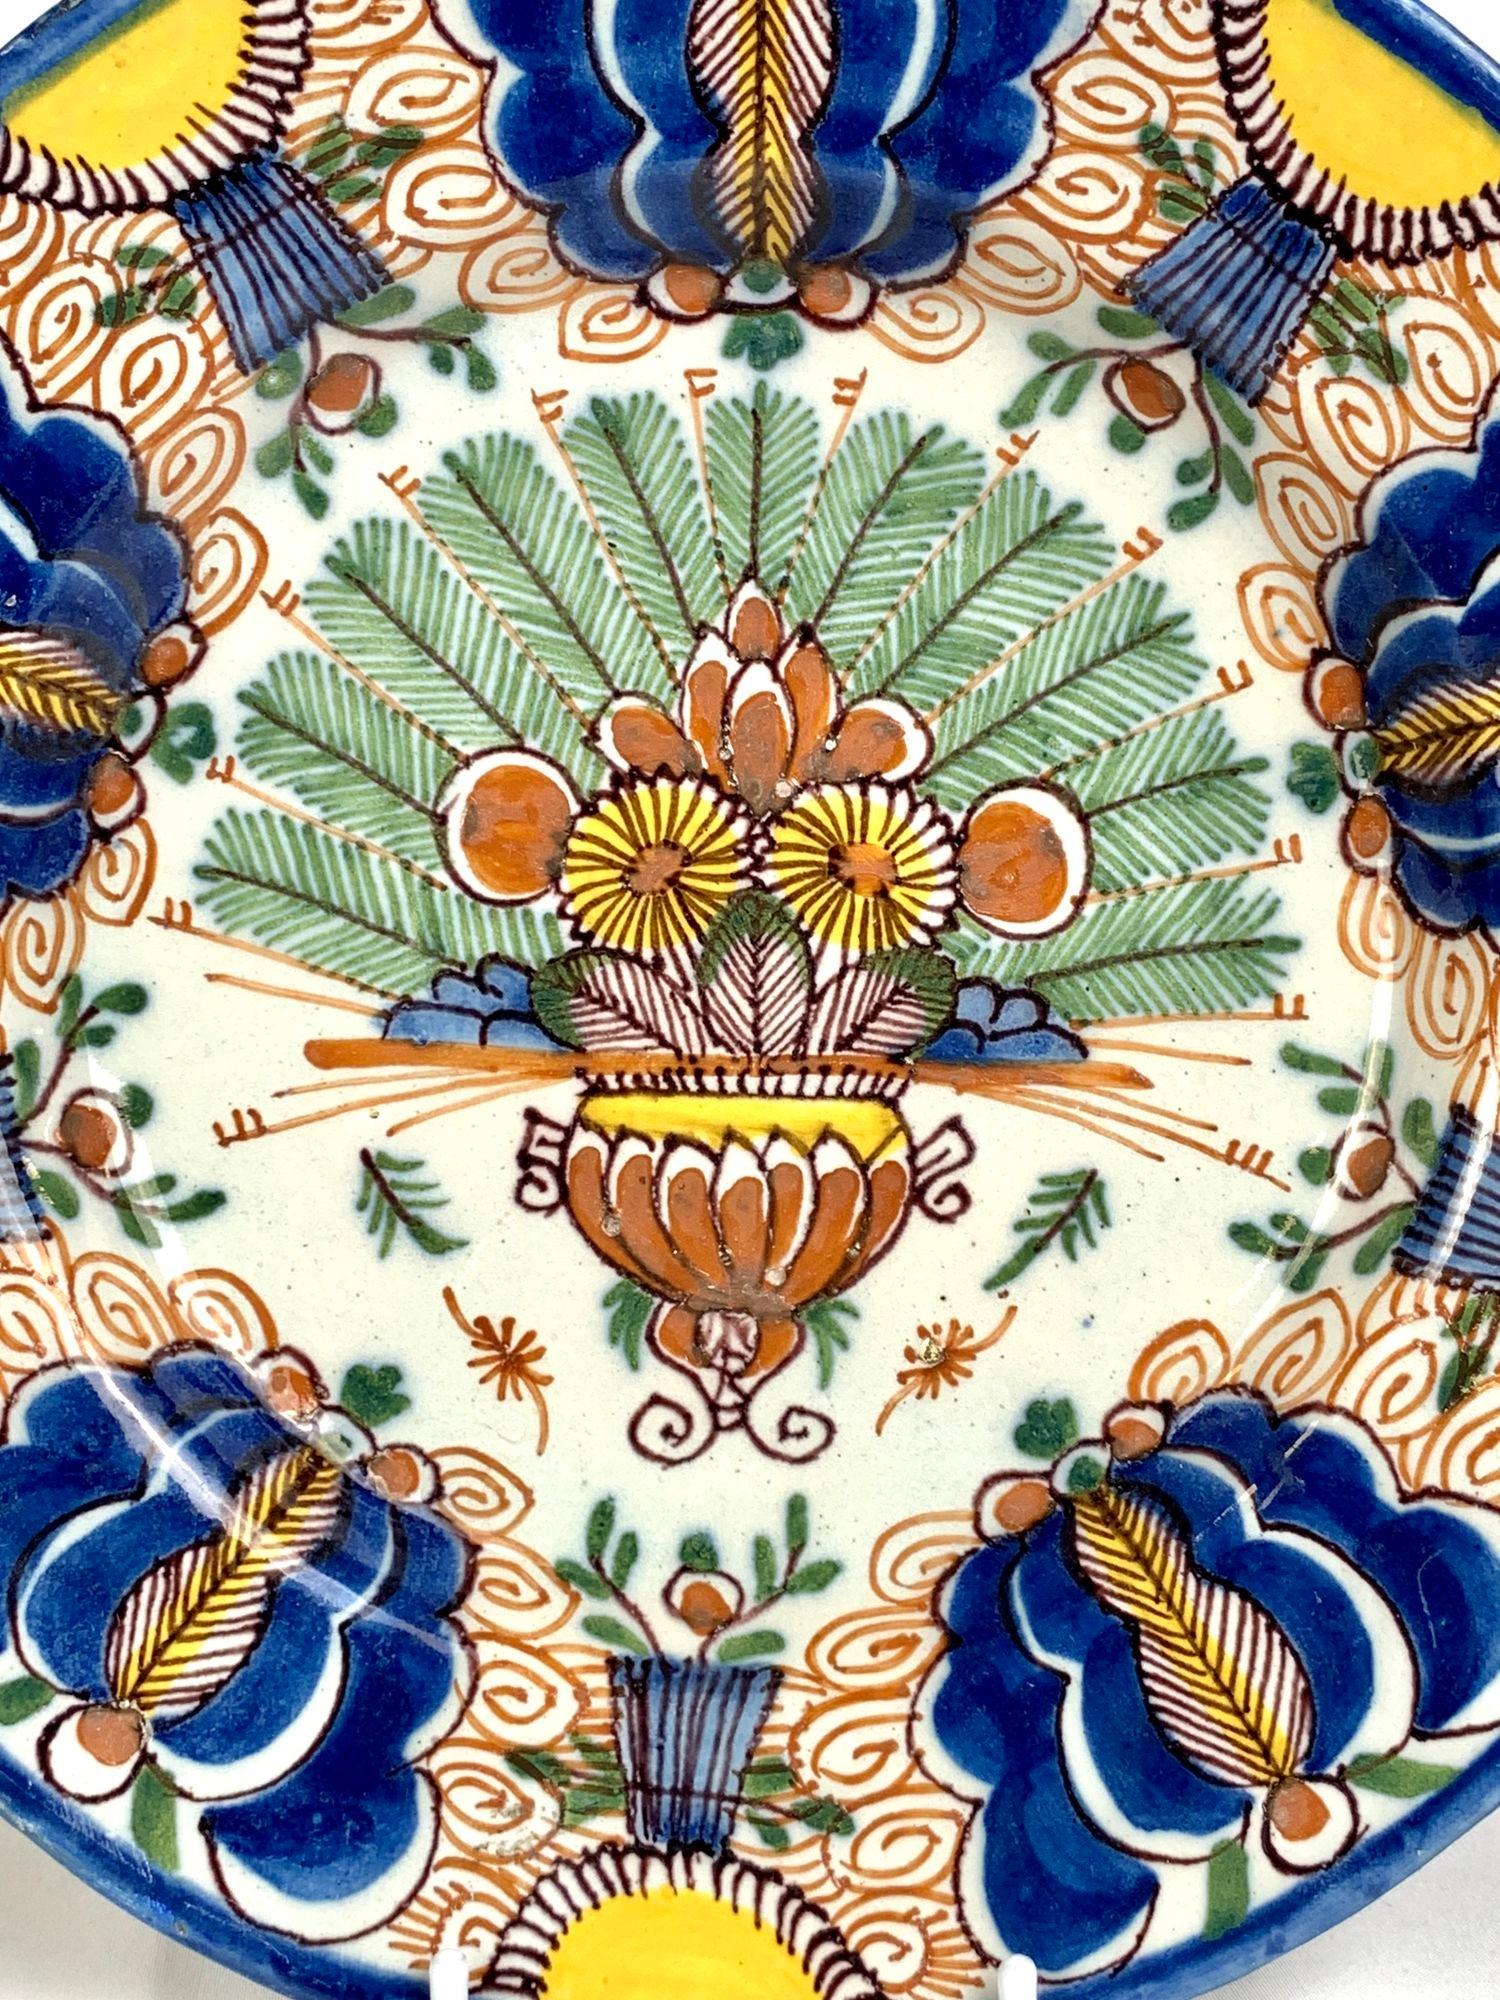 This Dutch Delft plate is a wow visually!
Made in the factory of De Porceleyn Lampetkan (The Porcelain Ewer) in the city of Delft circa 1760, it was hand-painted in bold polychrome colors of yellow, blue, iron red, green, and purple.
The center